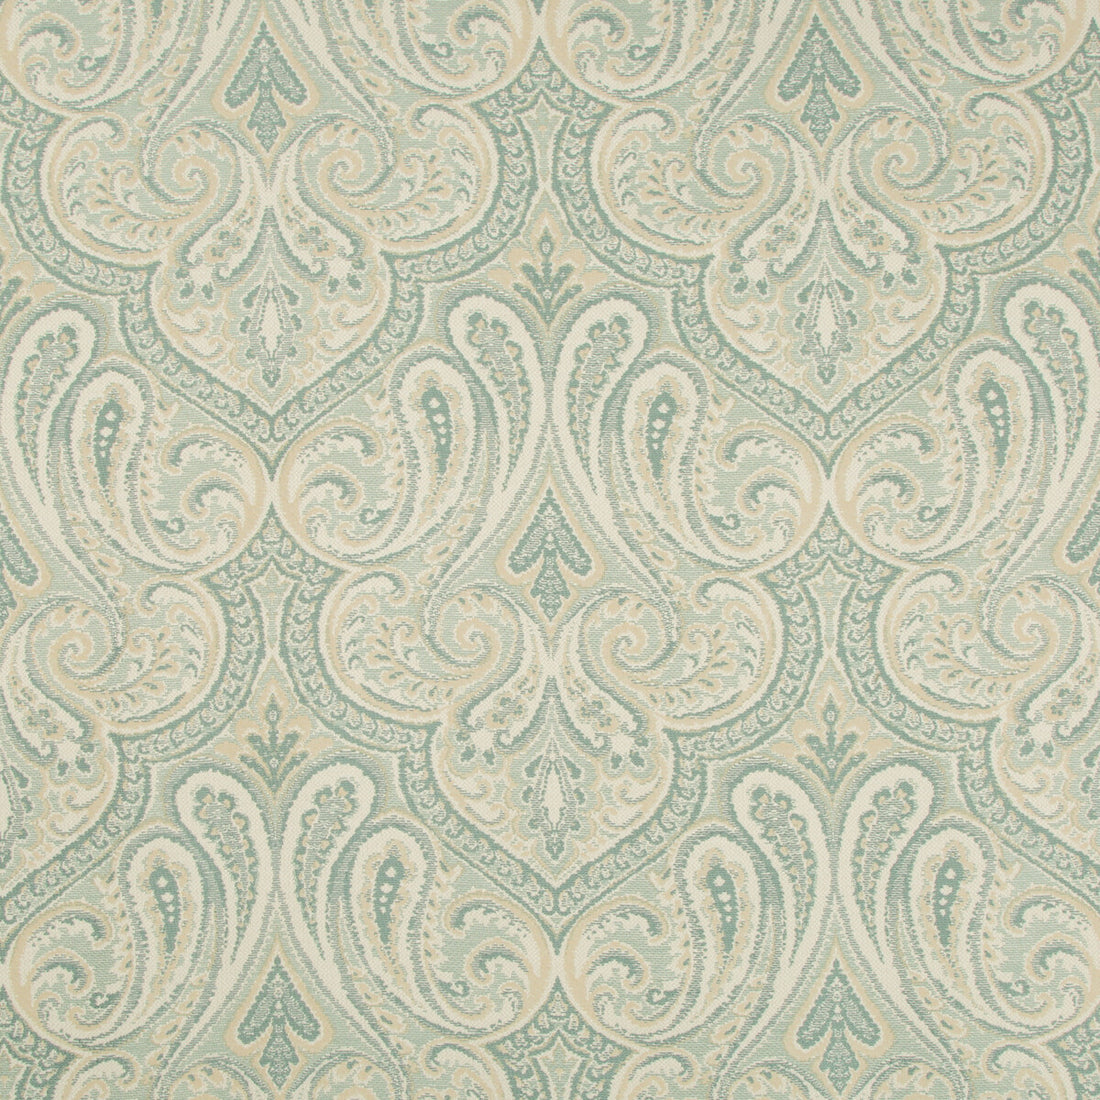 Kravet Design fabric in 34706-13 color - pattern 34706.13.0 - by Kravet Design in the Crypton Home collection